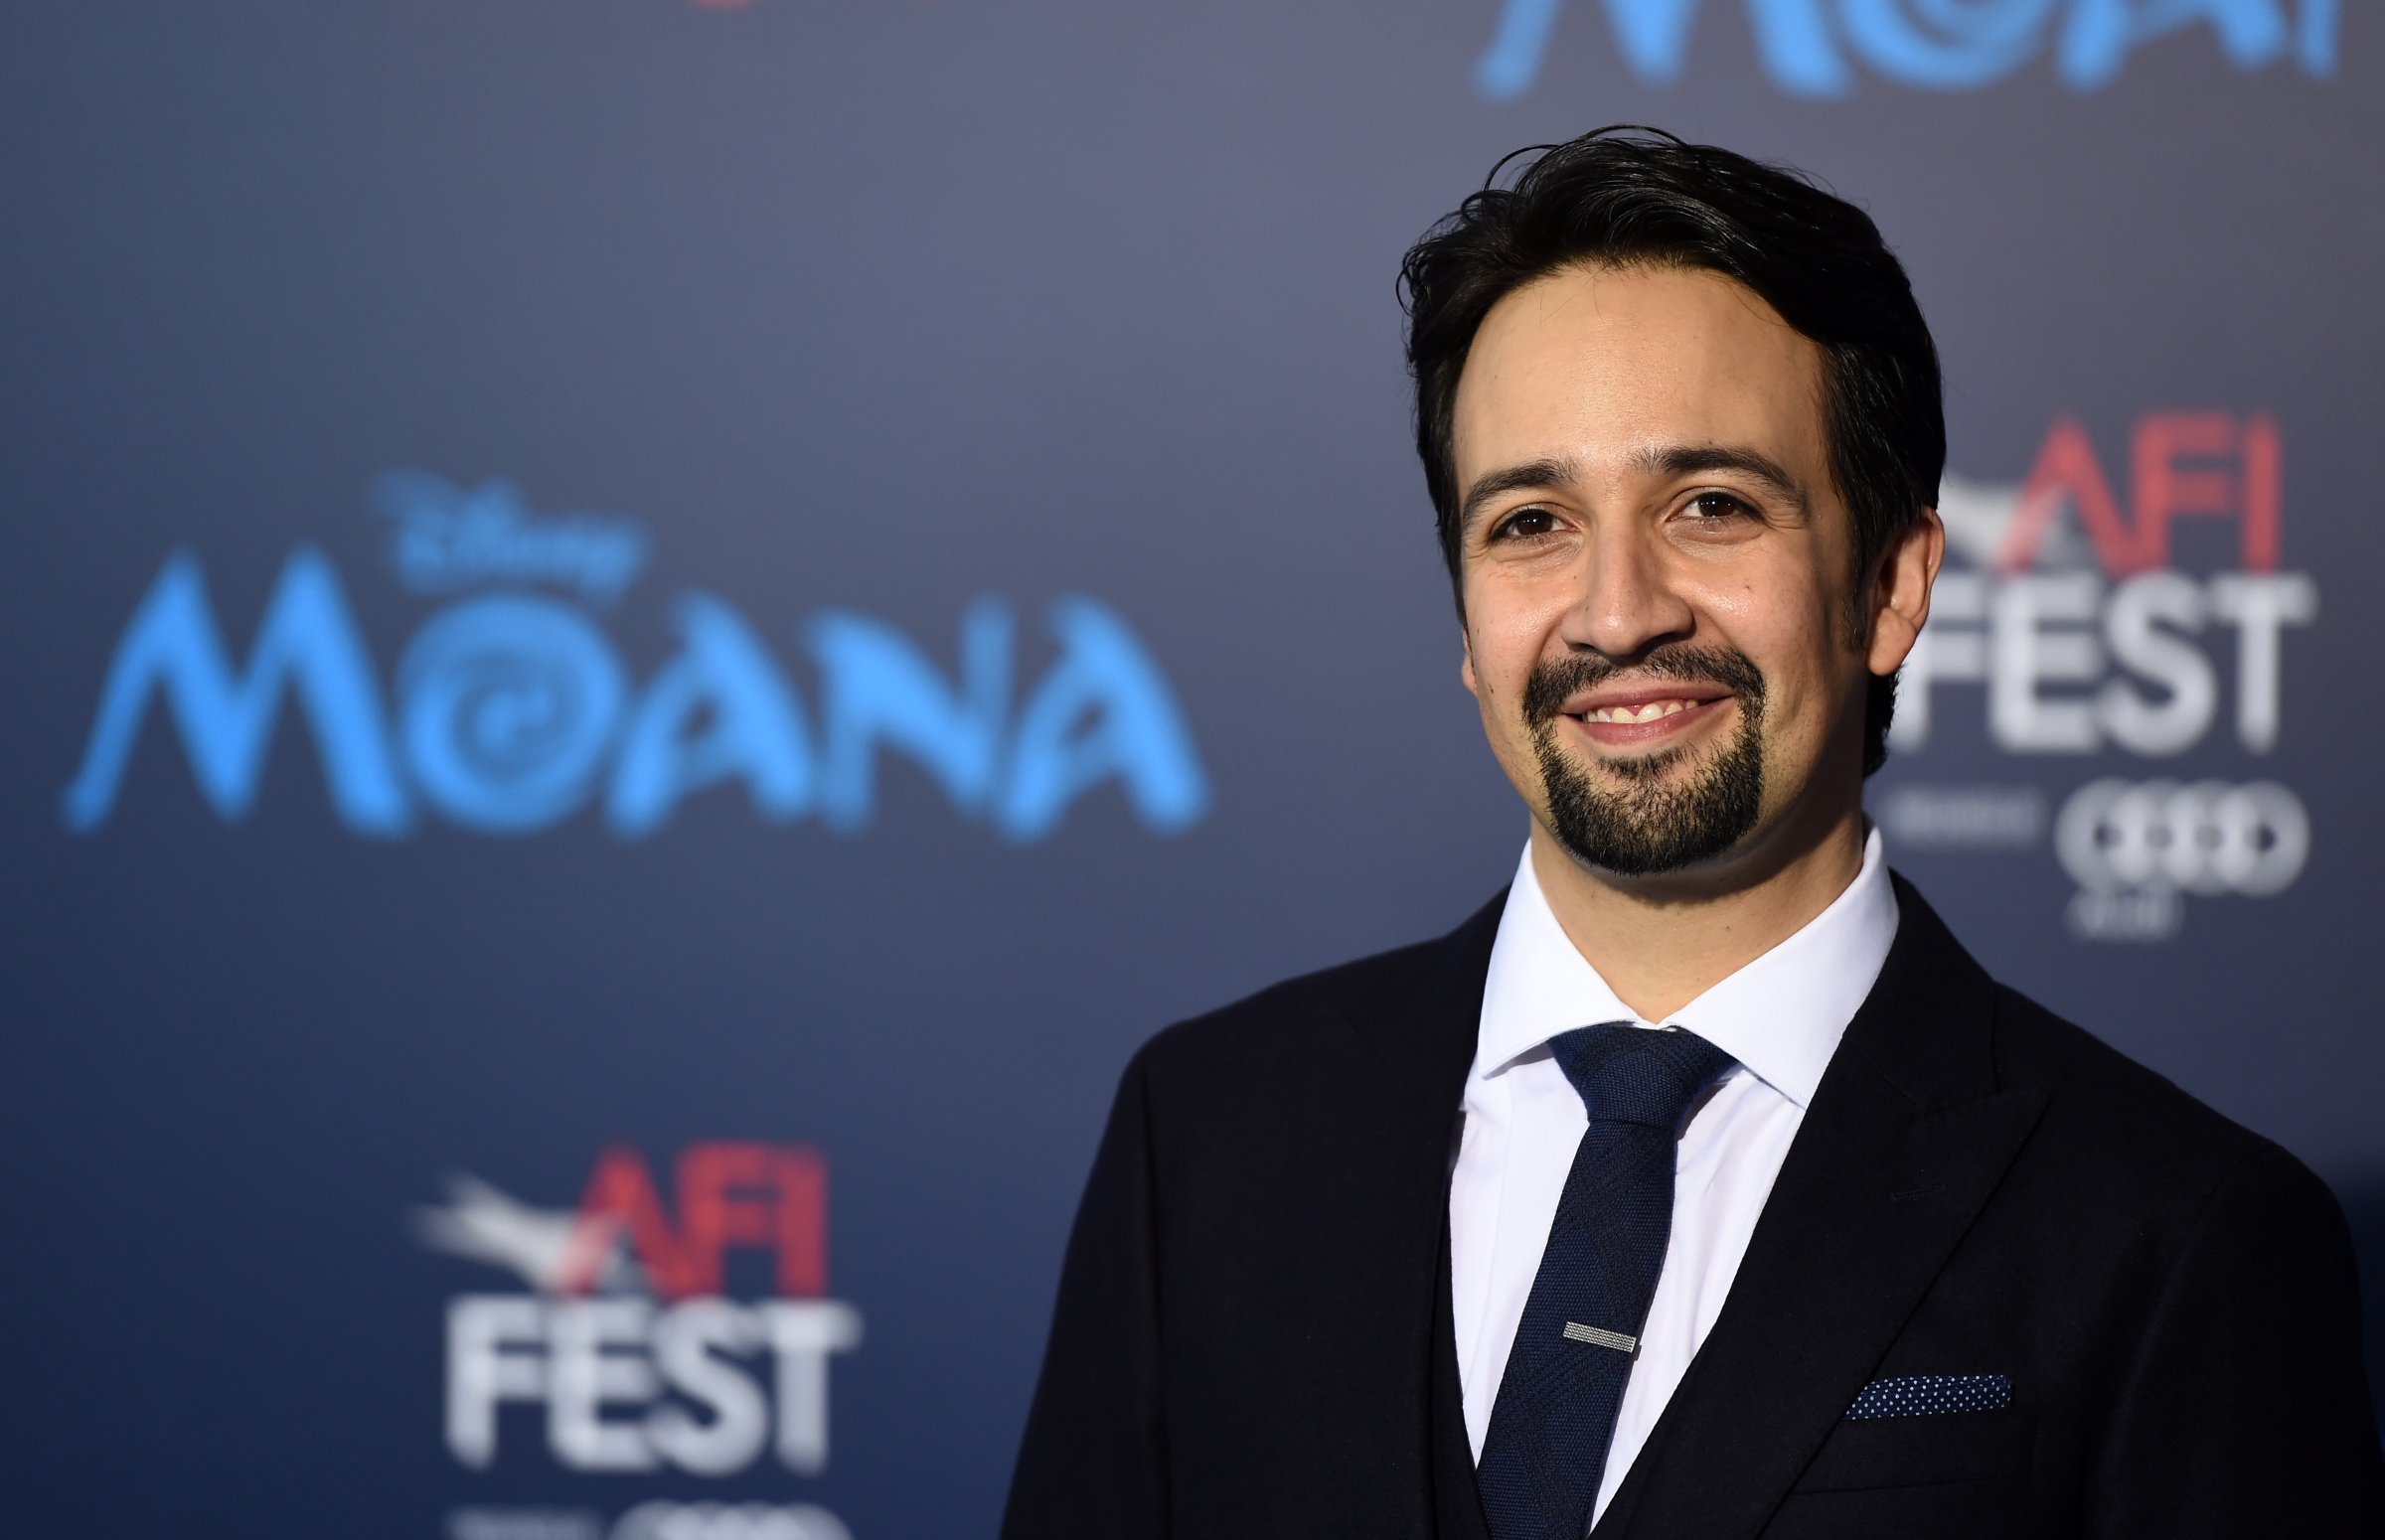 Actor and rapper Lin-Manuel Miranda arrives at the AFI FEST 2016 Presented By Audi premiere of Disney's "Moana" at the El Capitan Theatre on November 14, 2016 in Hollywood, California.